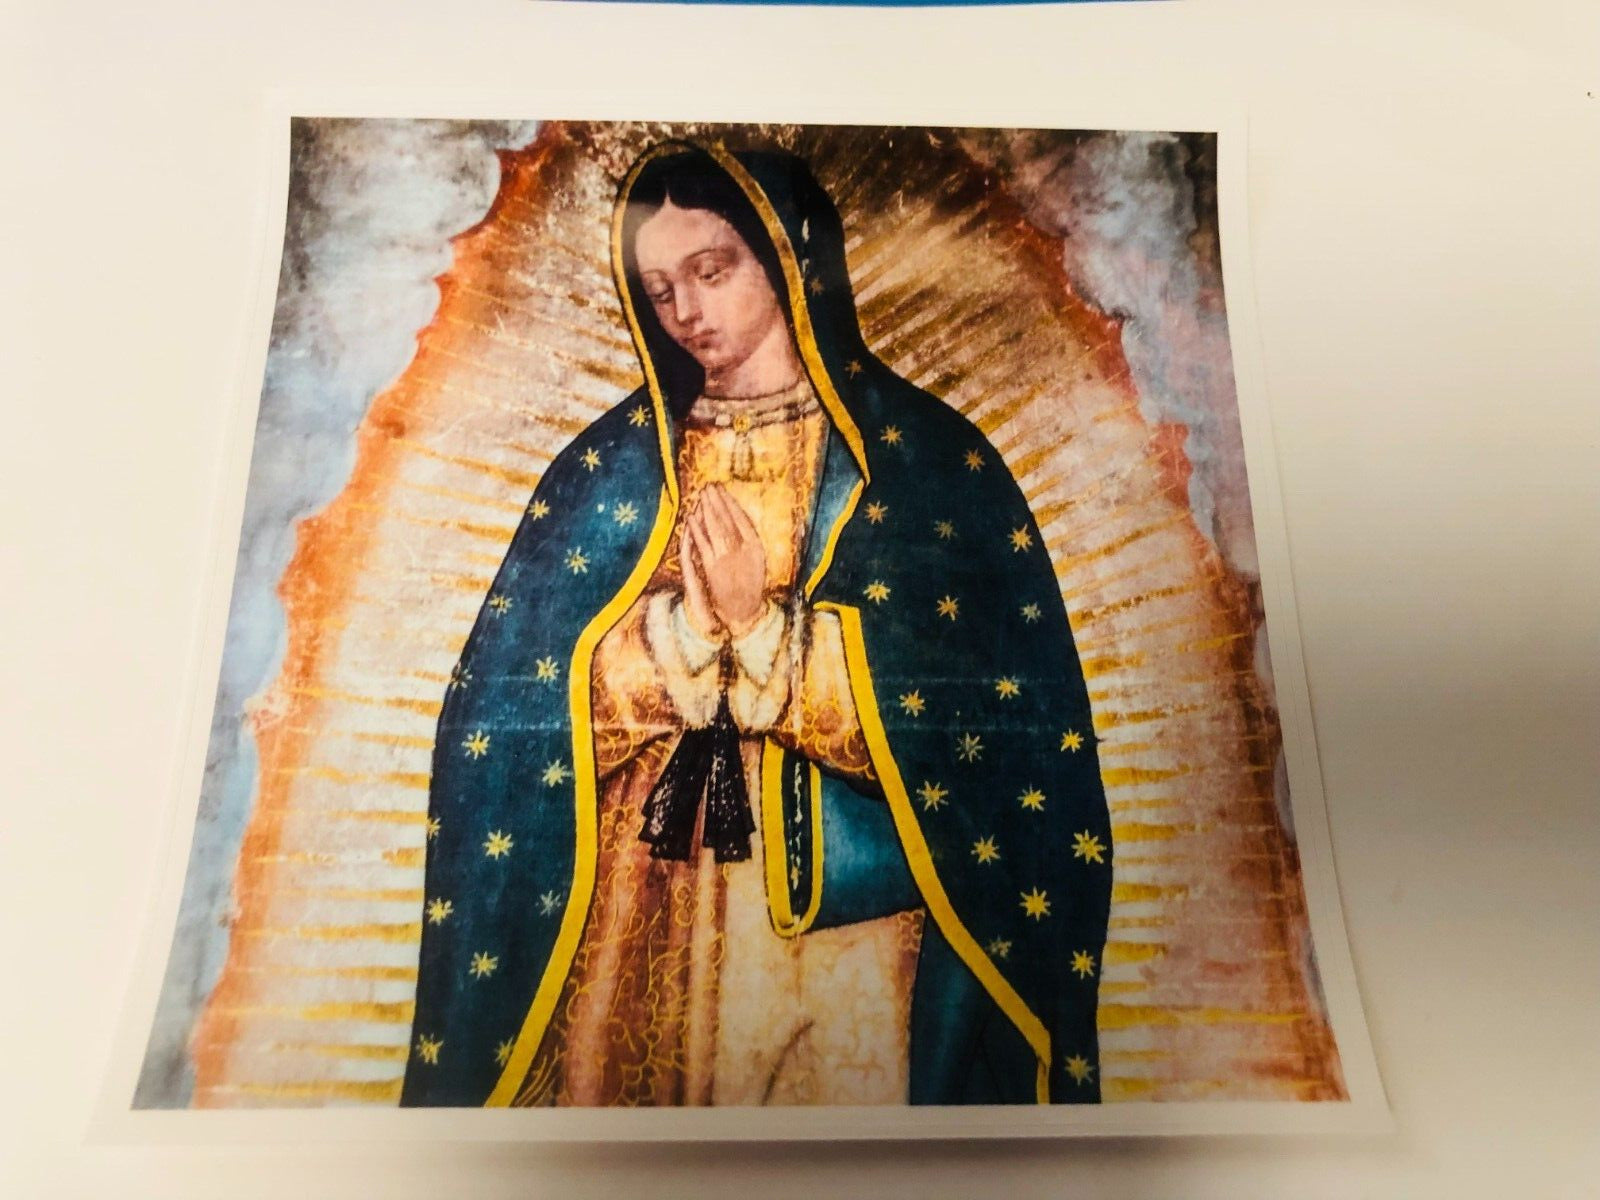 Our Lady of Guadalupe 5.75" x 5.75" Custom Glossy Decal Sticker, New